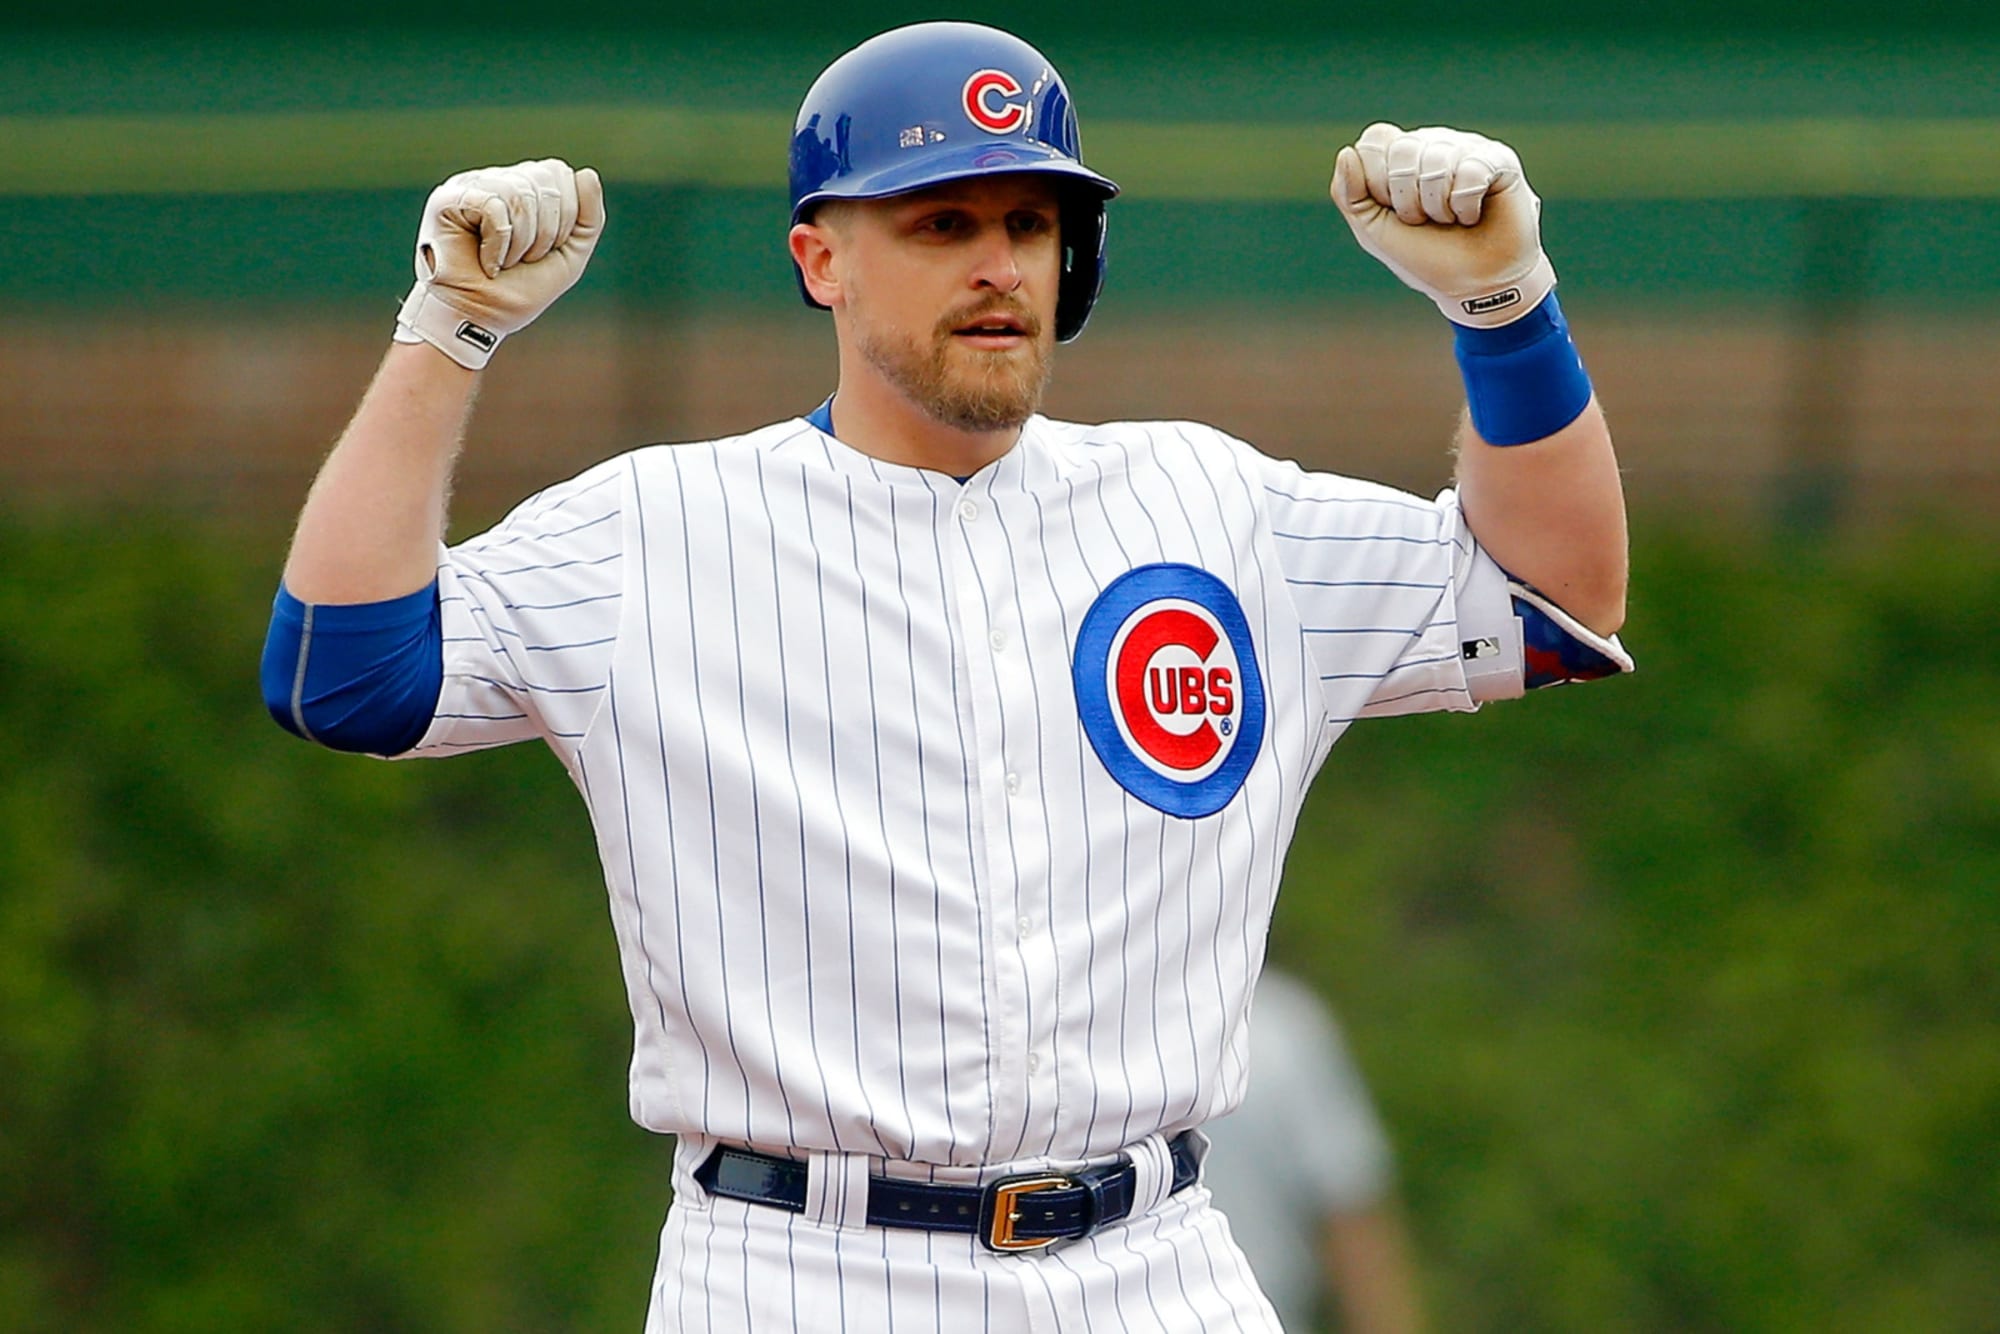 Chicago Cubs players who suited up in 2016